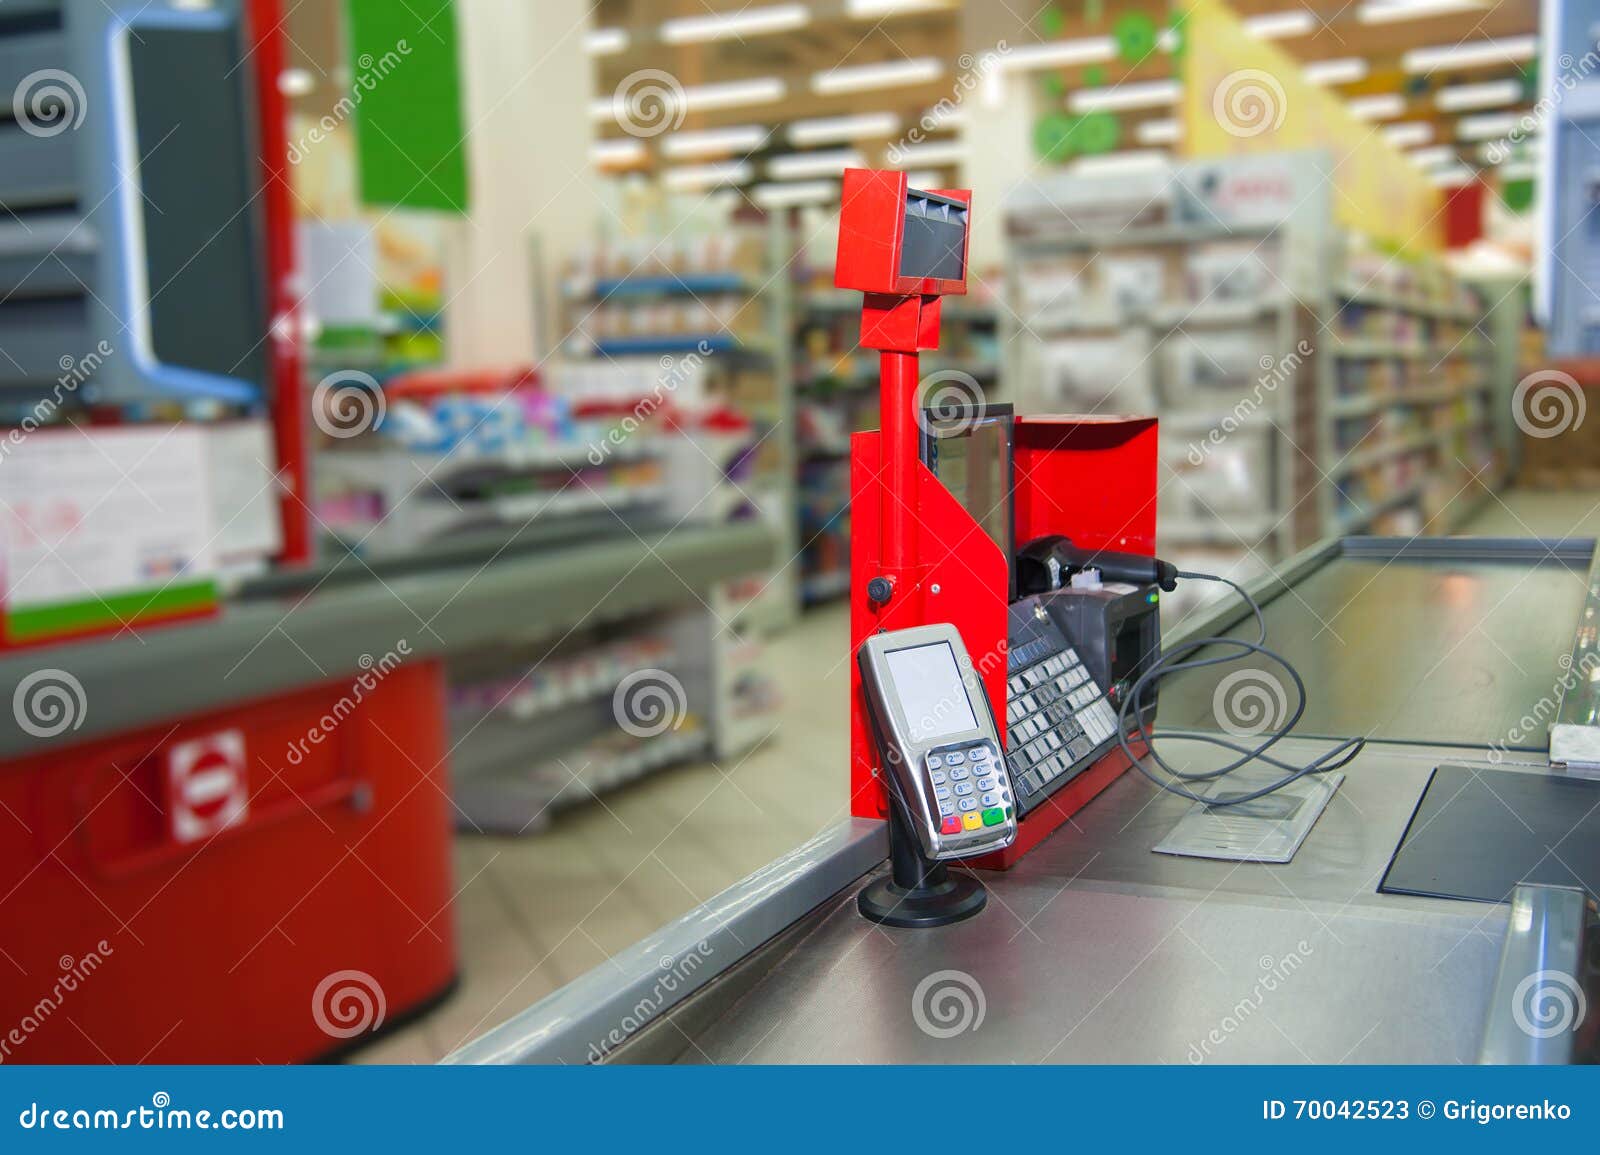 Cash Desk With Payment Terminal In Supermarket Stock Image Image